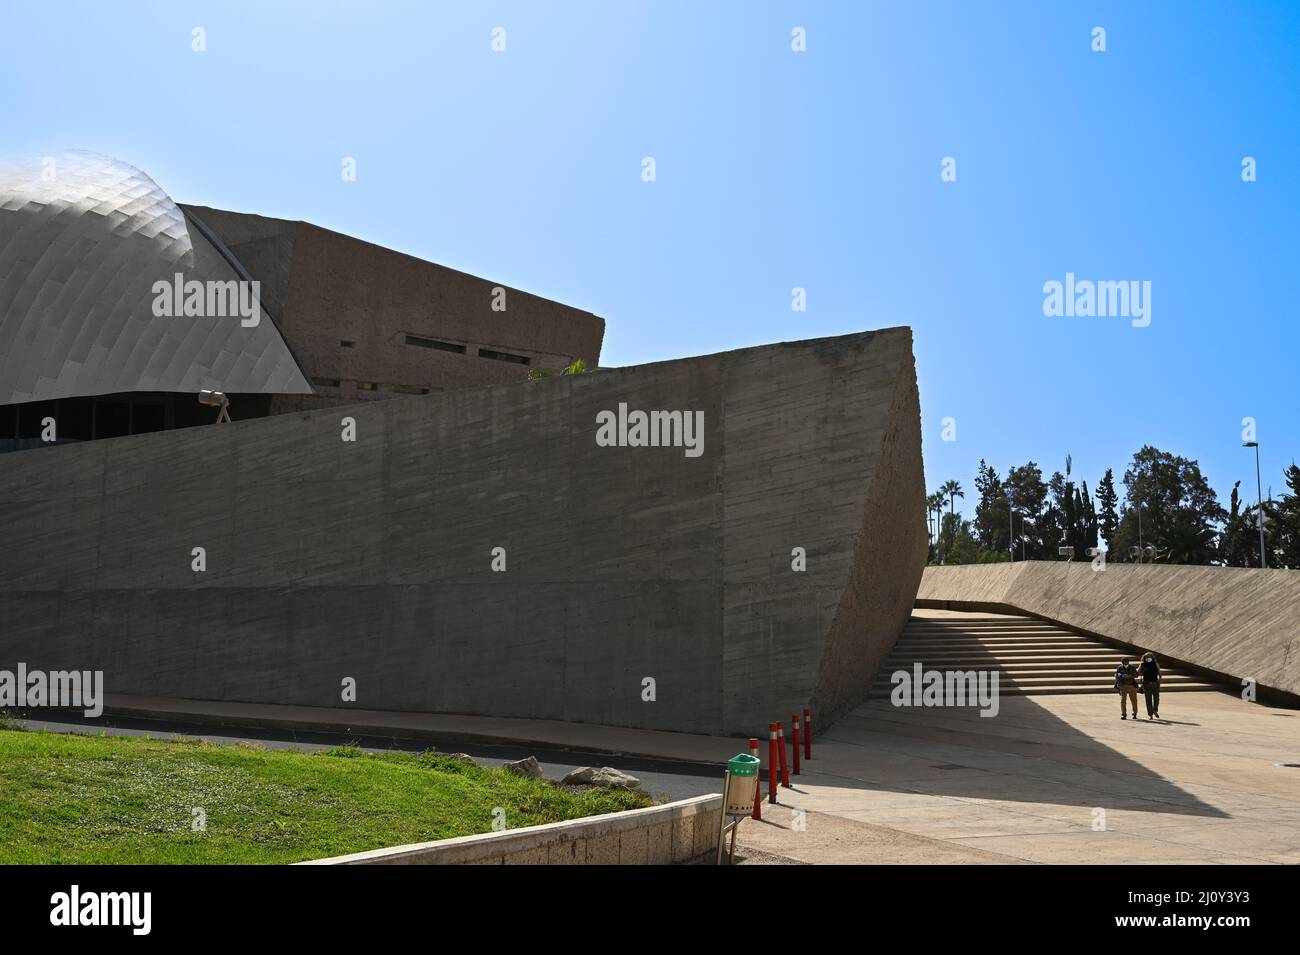 The Magma Art and Congress building in Adeje, Tenerife, Stock Photo